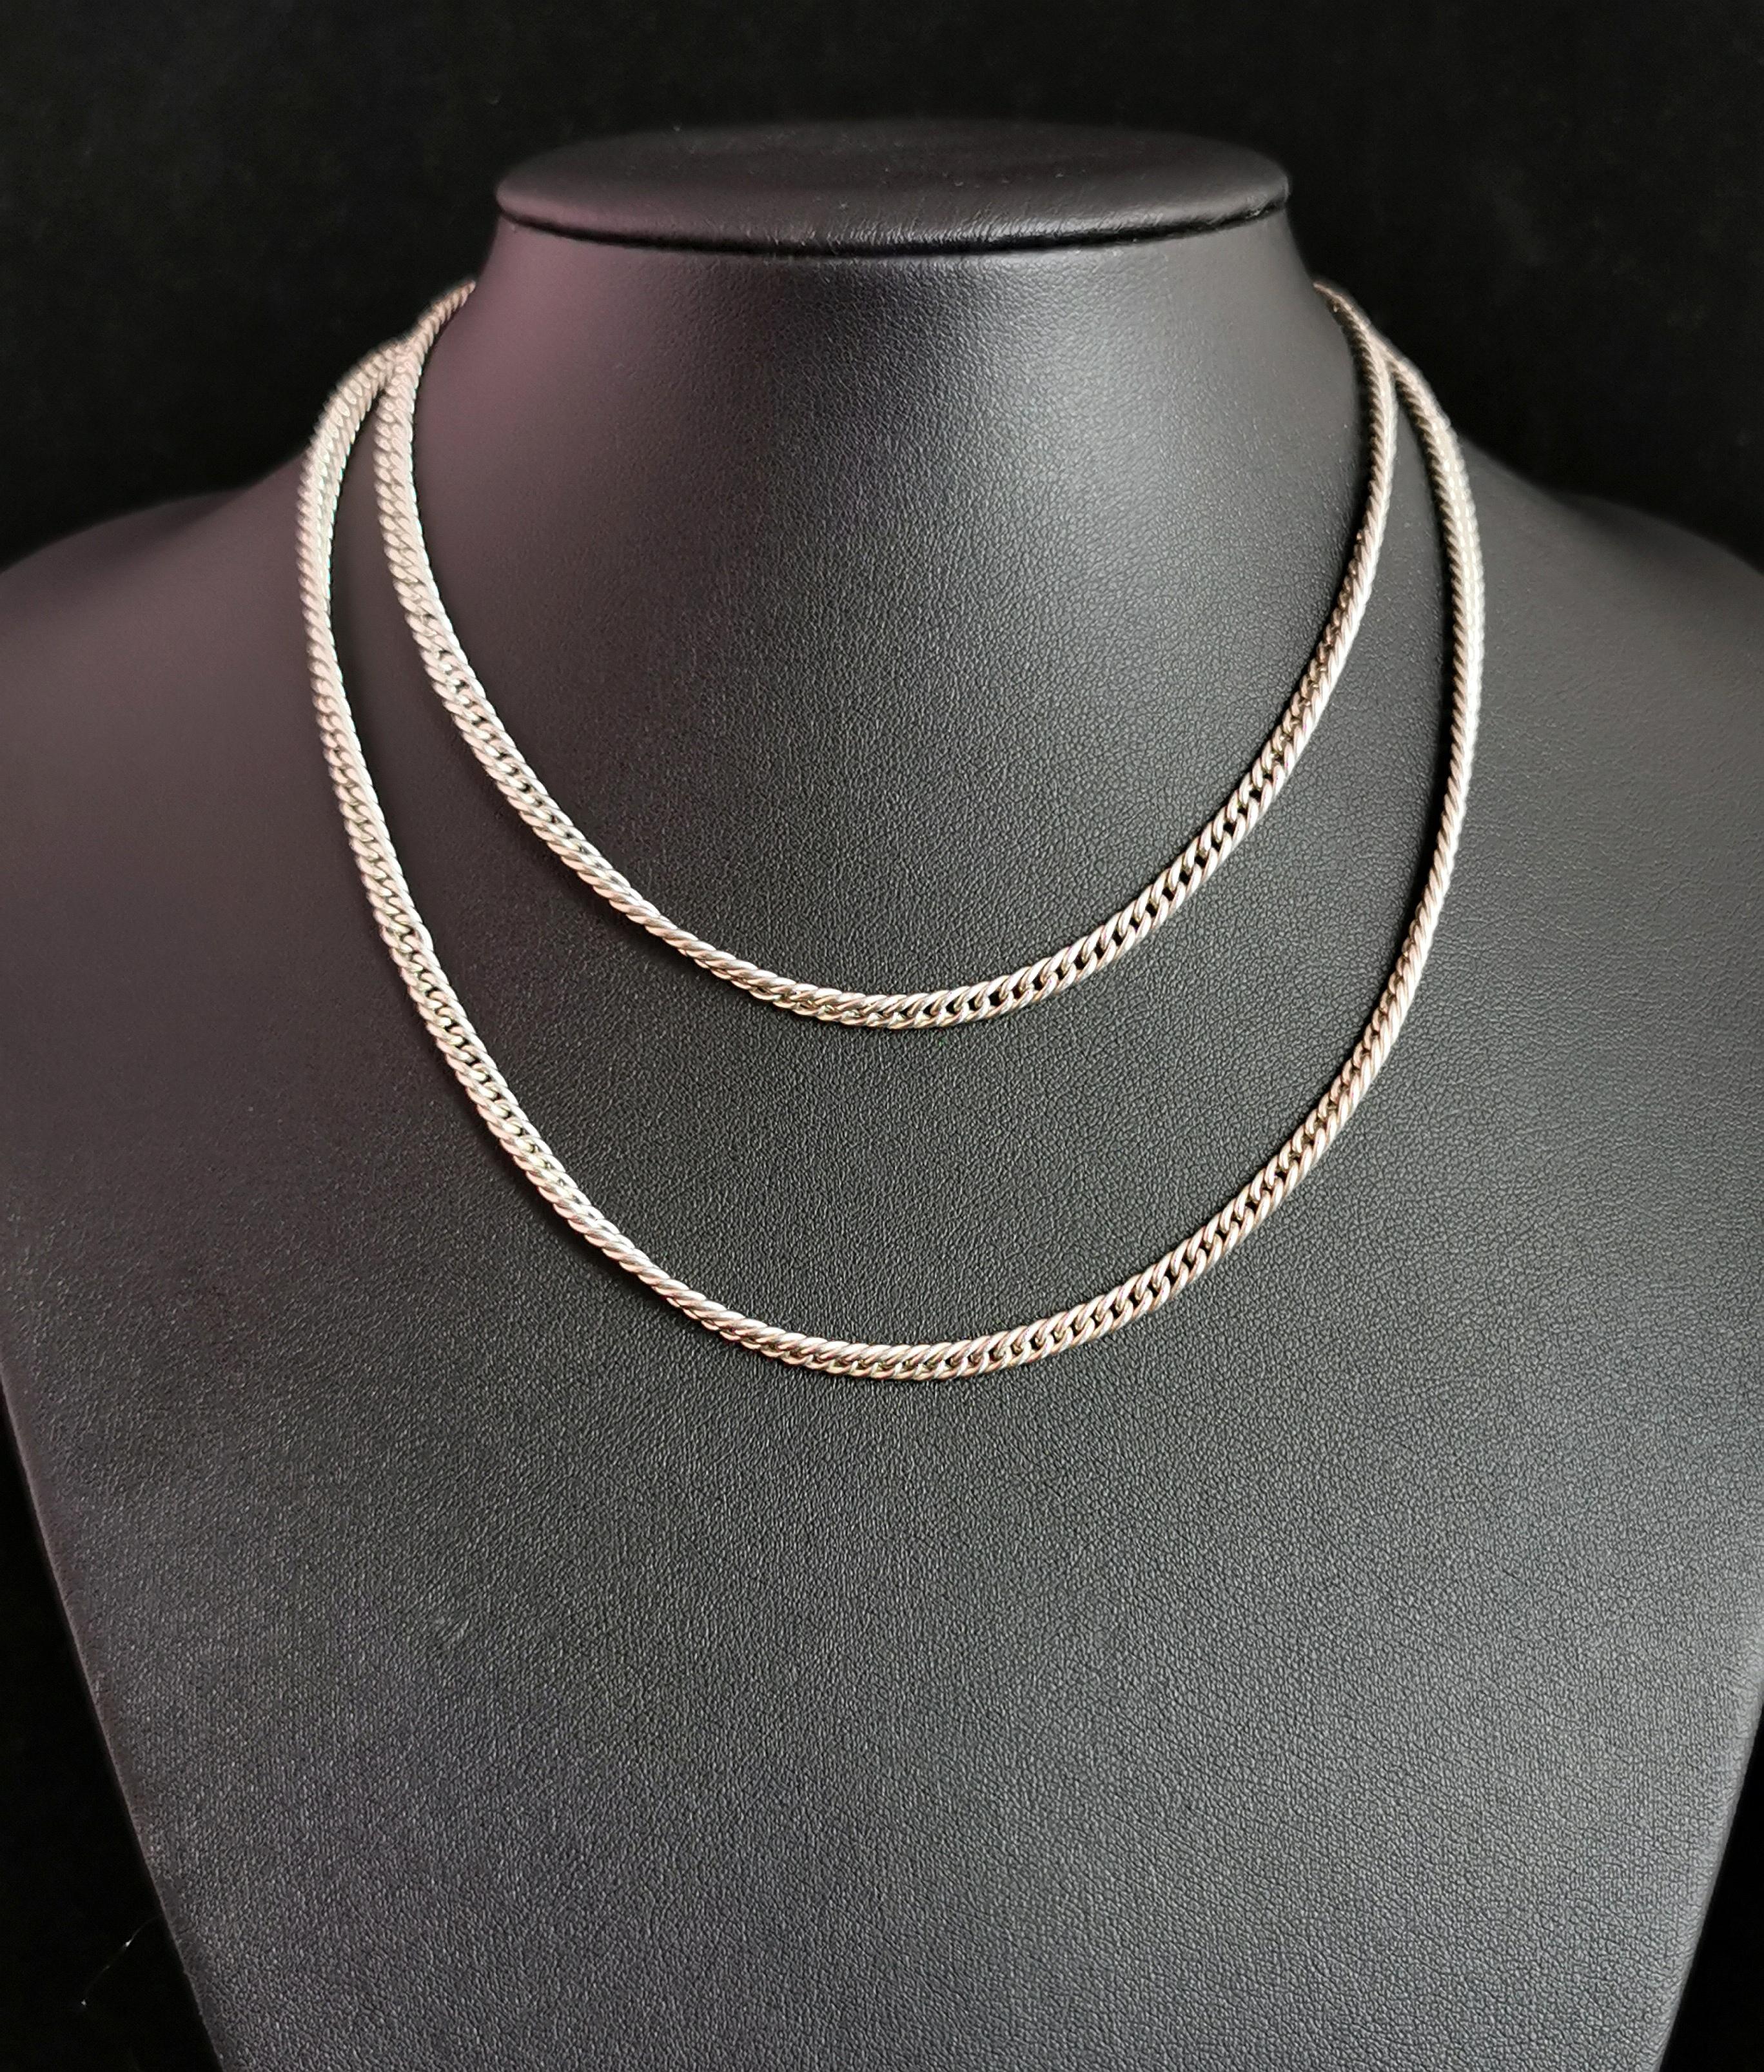 A gorgeous antique sterling silver long curb link chain necklace.

This is a lovely long length chain at 30.5